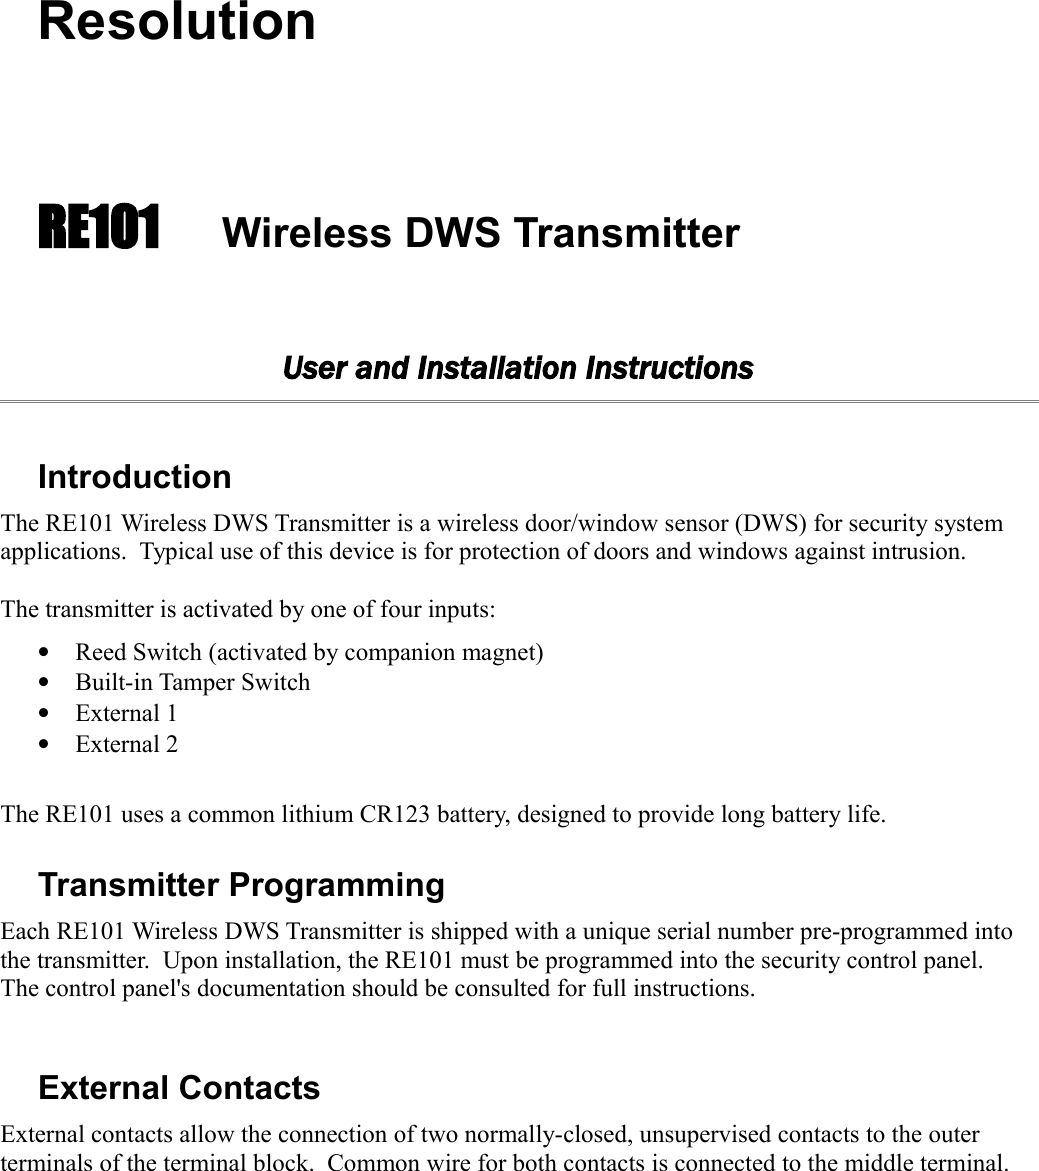 ResolutionRE101 Wireless DWS TransmitterUser and Installation InstructionsIntroductionThe RE101 Wireless DWS Transmitter is a wireless door/window sensor (DWS) for security system applications.  Typical use of this device is for protection of doors and windows against intrusion.  The transmitter is activated by one of four inputs:•Reed Switch (activated by companion magnet)•Built-in Tamper Switch•External 1 •External 2The RE101 uses a common lithium CR123 battery, designed to provide long battery life.  Transmitter ProgrammingEach RE101 Wireless DWS Transmitter is shipped with a unique serial number pre-programmed into the transmitter.  Upon installation, the RE101 must be programmed into the security control panel. The control panel&apos;s documentation should be consulted for full instructions.External ContactsExternal contacts allow the connection of two normally-closed, unsupervised contacts to the outer terminals of the terminal block.  Common wire for both contacts is connected to the middle terminal.